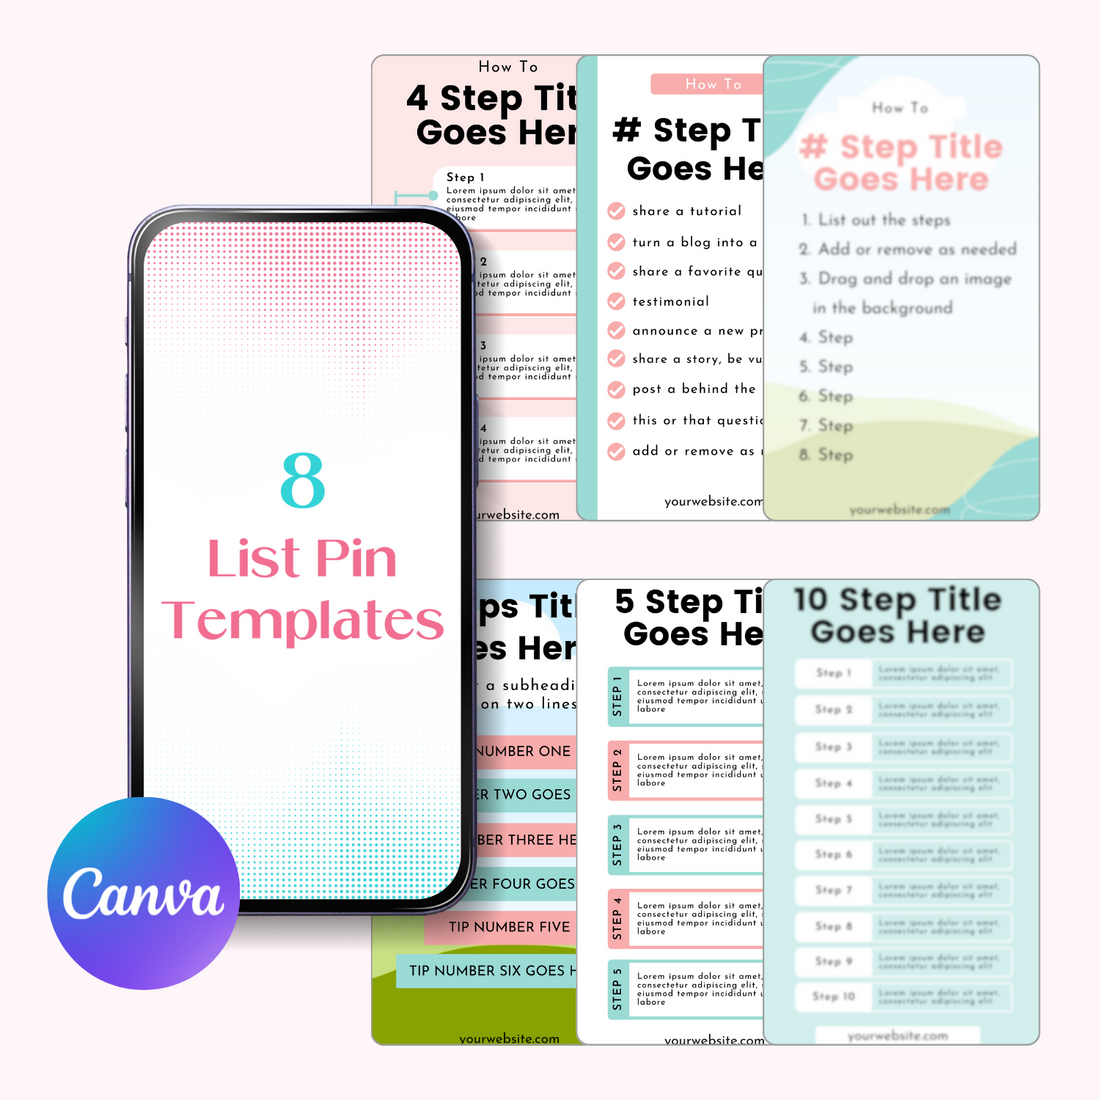 A cell phone and graphic mockup displaying the Pinterest List Pin Templates.